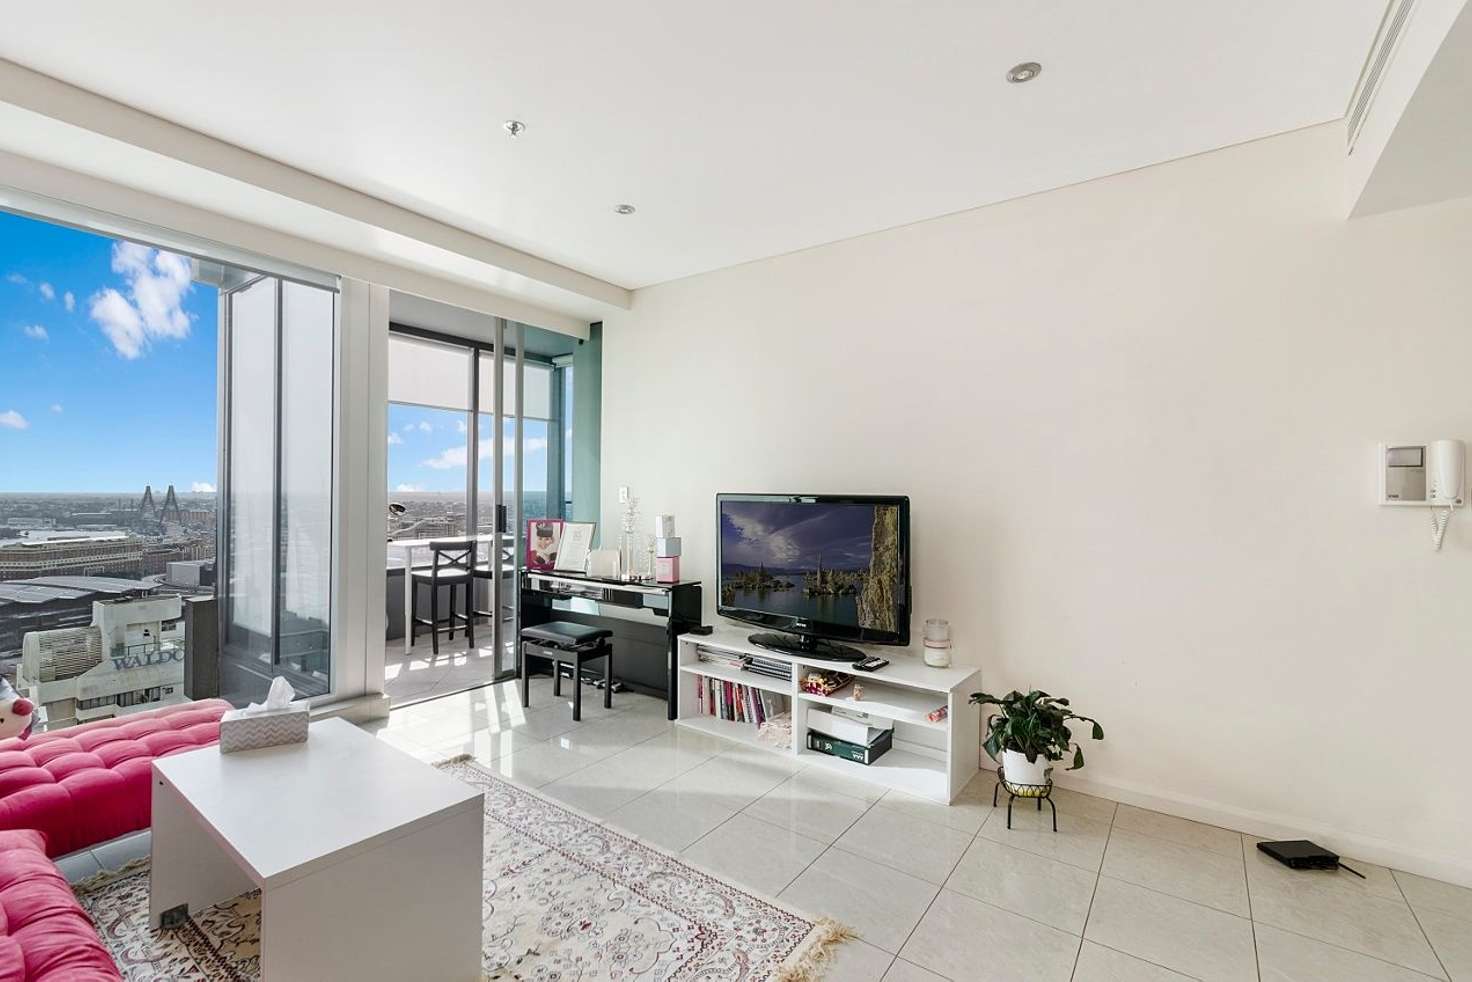 Main view of Homely apartment listing, 4007/93 Liverpool St, Sydney NSW 2000